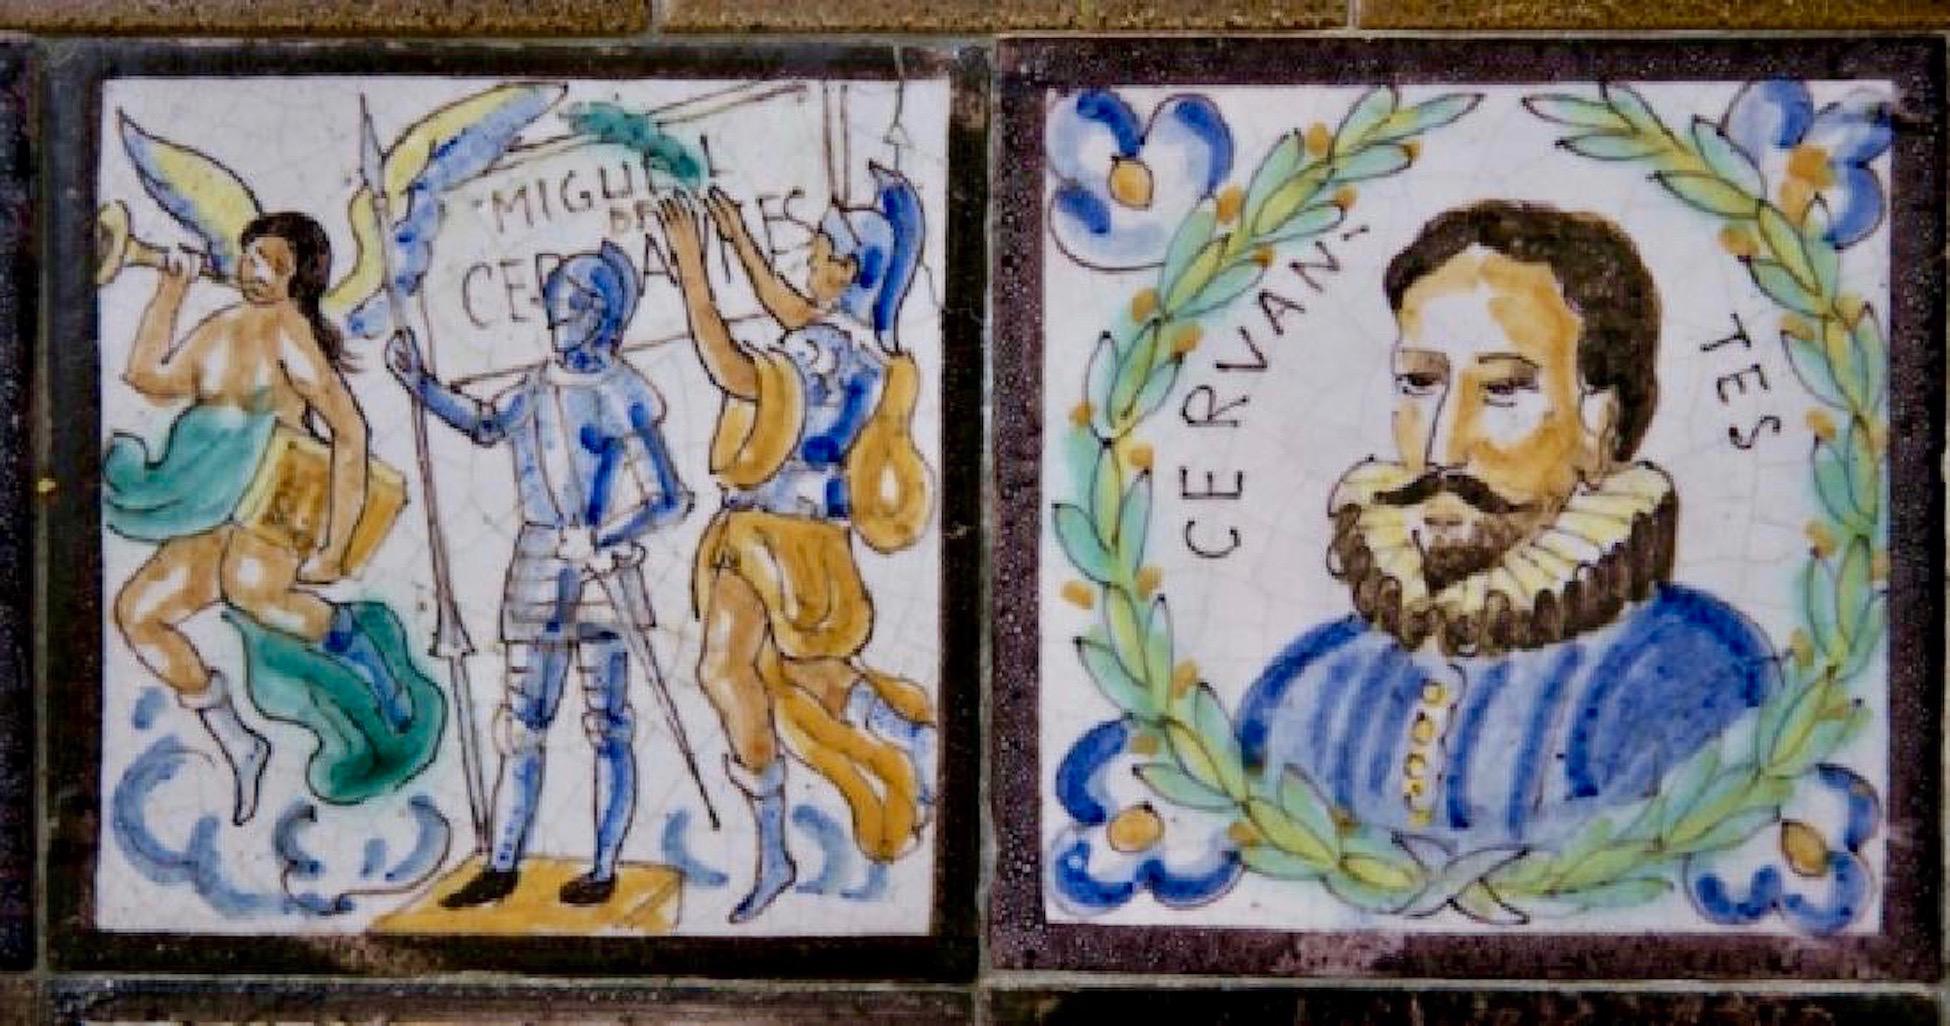 Late 18th-early 19th century monumental installation of 180 antique Spanish ceramic tiles, hand painted, illustrating the story and characters of Don Quixote. Ceramic Art inspired by the literary arts manifested in Folk Art form. Astonishing level